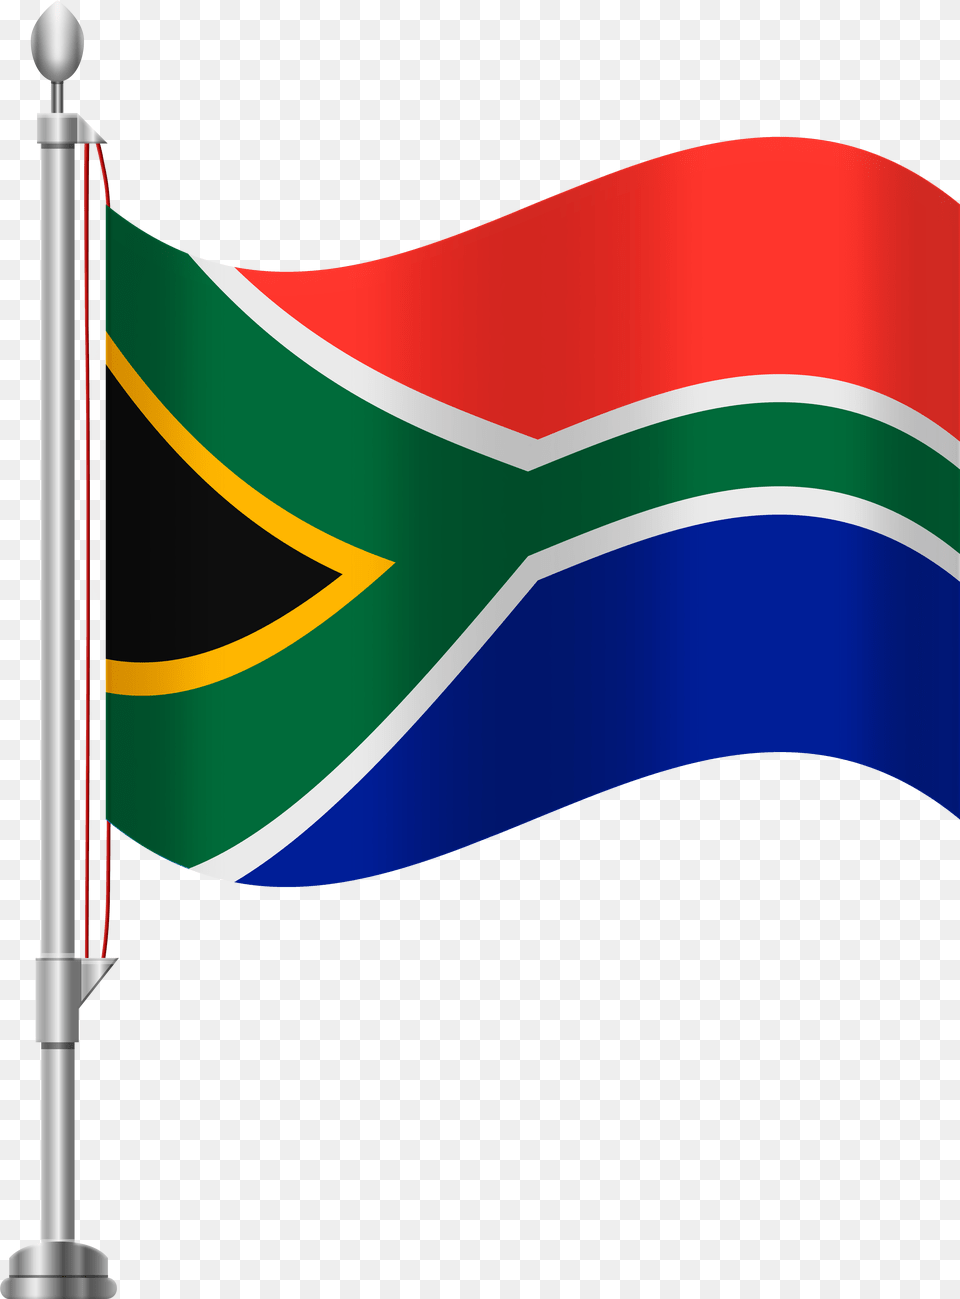 South Africa Flag Clip Art, South Africa Flag Png